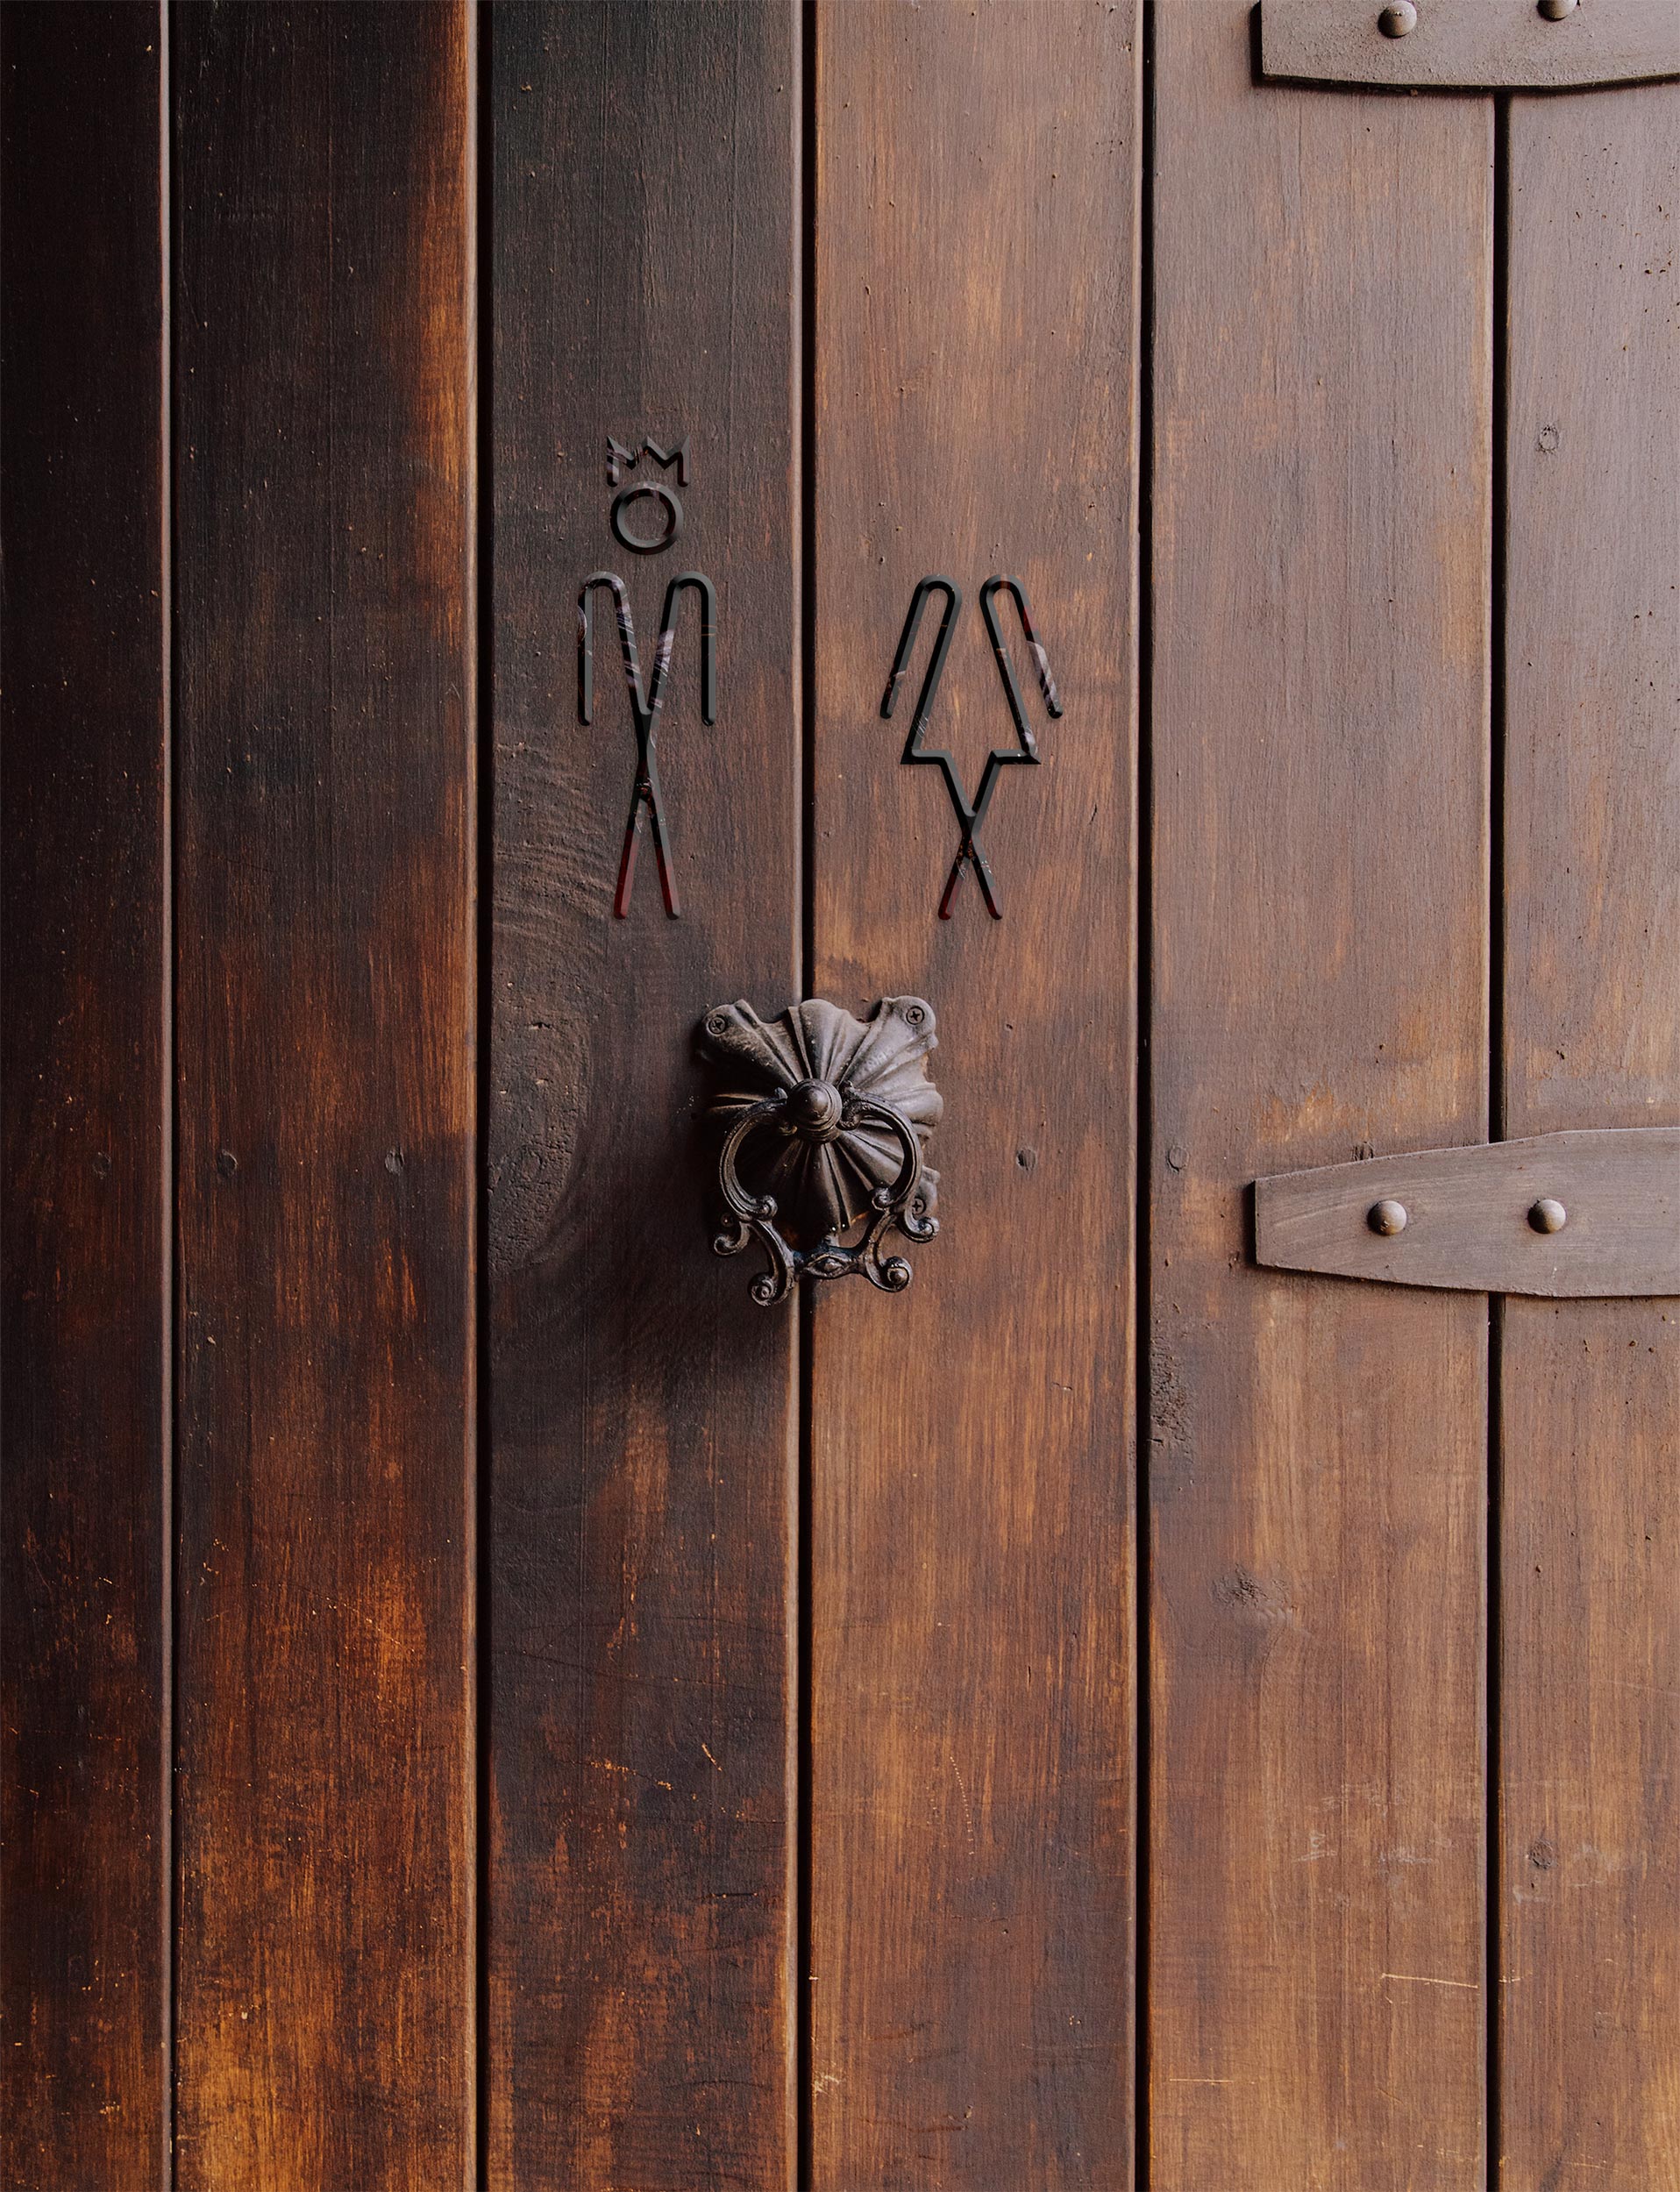 Photo of a wood panelled toilet door, with a knocker in the centre. Above, wire outlines of male/female symbols for toilets. The male figure has a crown, representing Henry VIII, and the female figure has lost her head, representing Anne Boleyn.